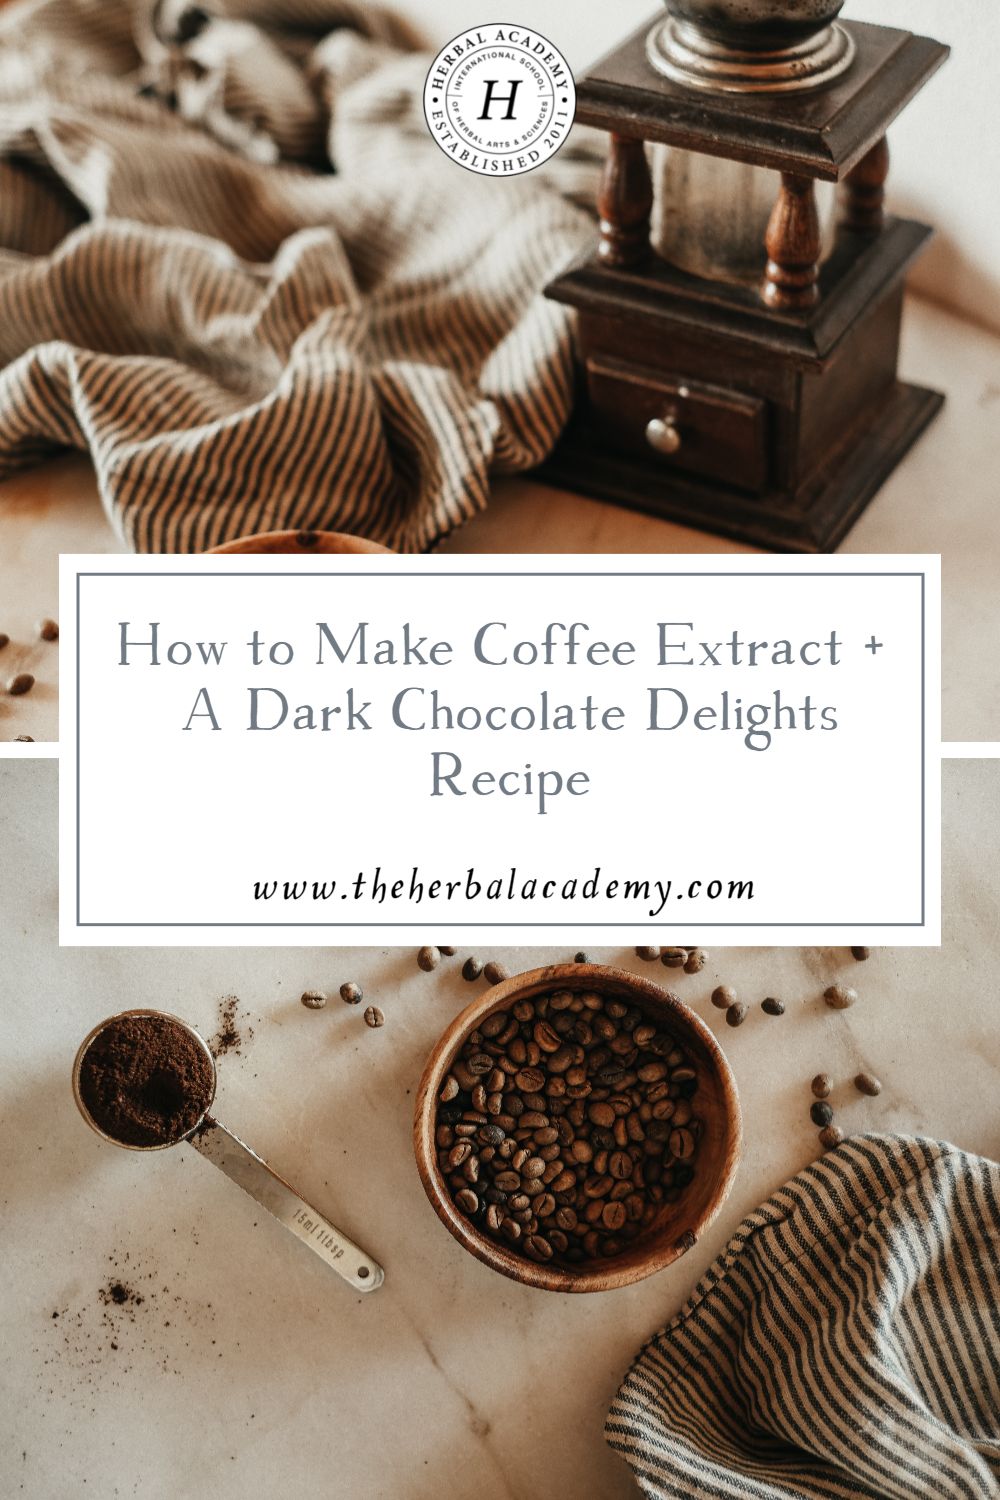 How to Make Coffee Extract + A Dark Chocolate Delights Recipe | Herbal Academy | Turning ground coffee beans into coffee extract is one way to enjoy the taste and benefits of coffee and make tasty chocolate delights!